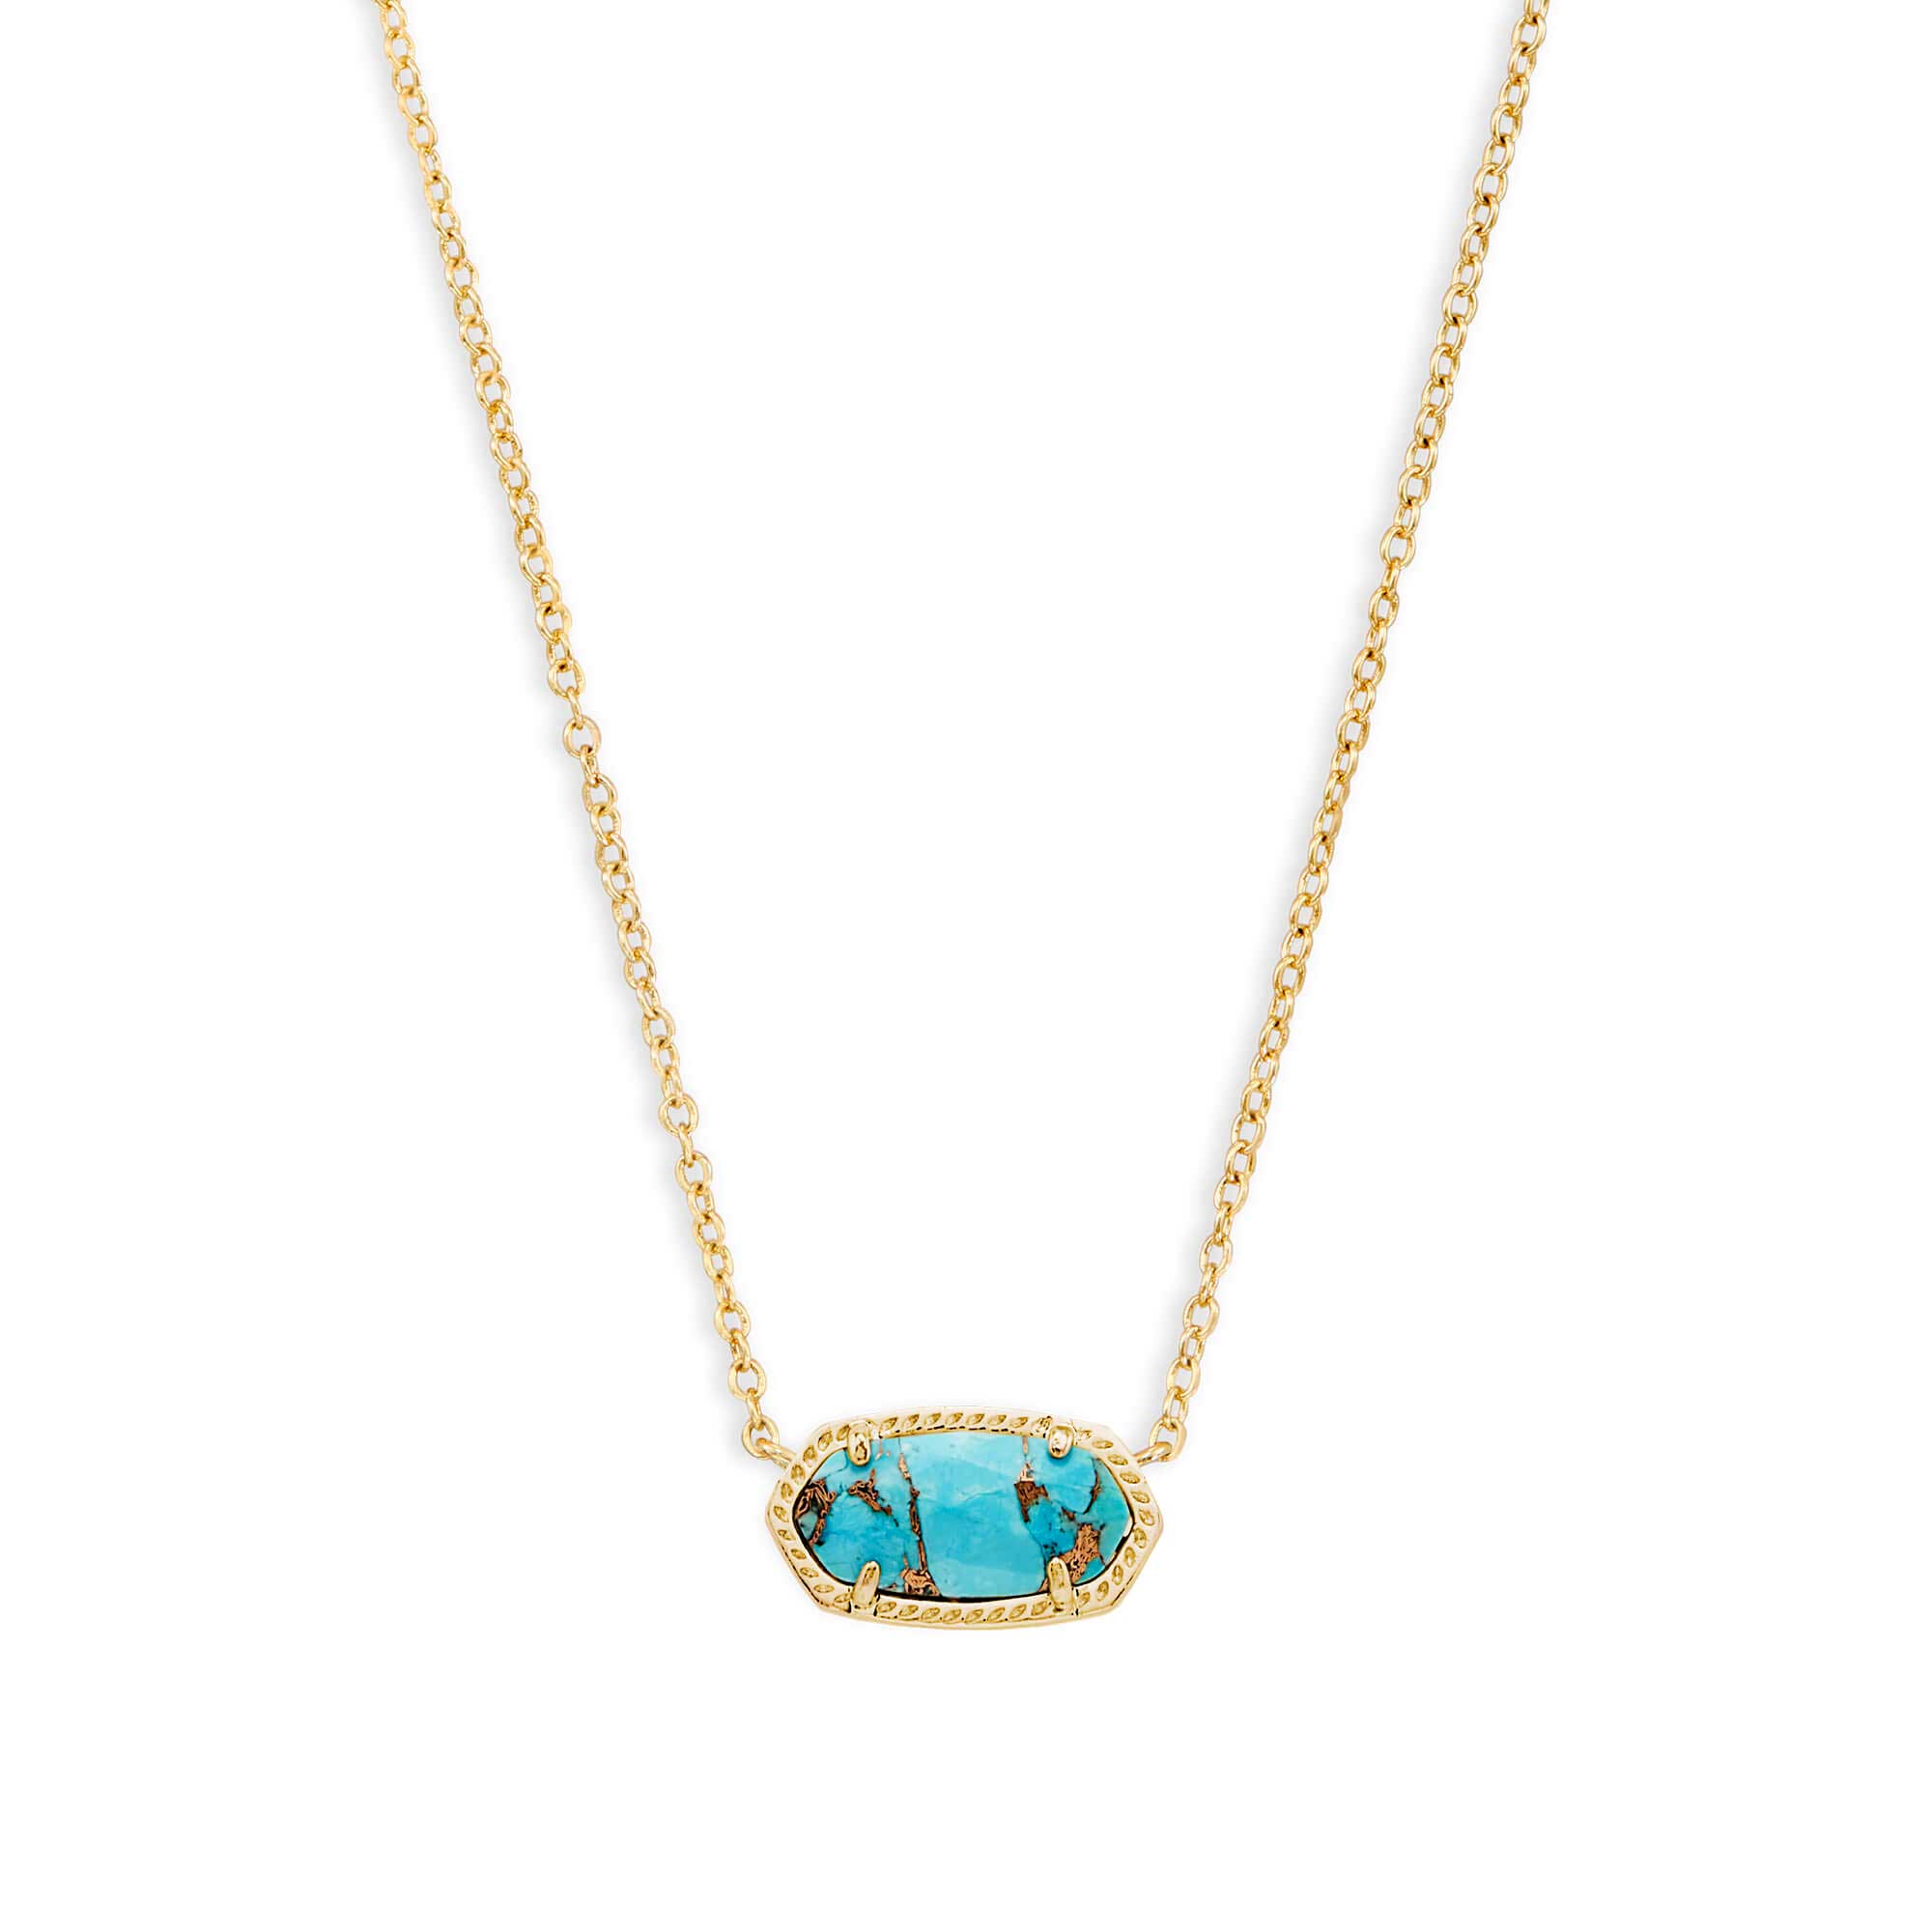 Details about  / New Kendra Scott Elisa Pendant Necklace In Bronze Veined Turquoise Gold